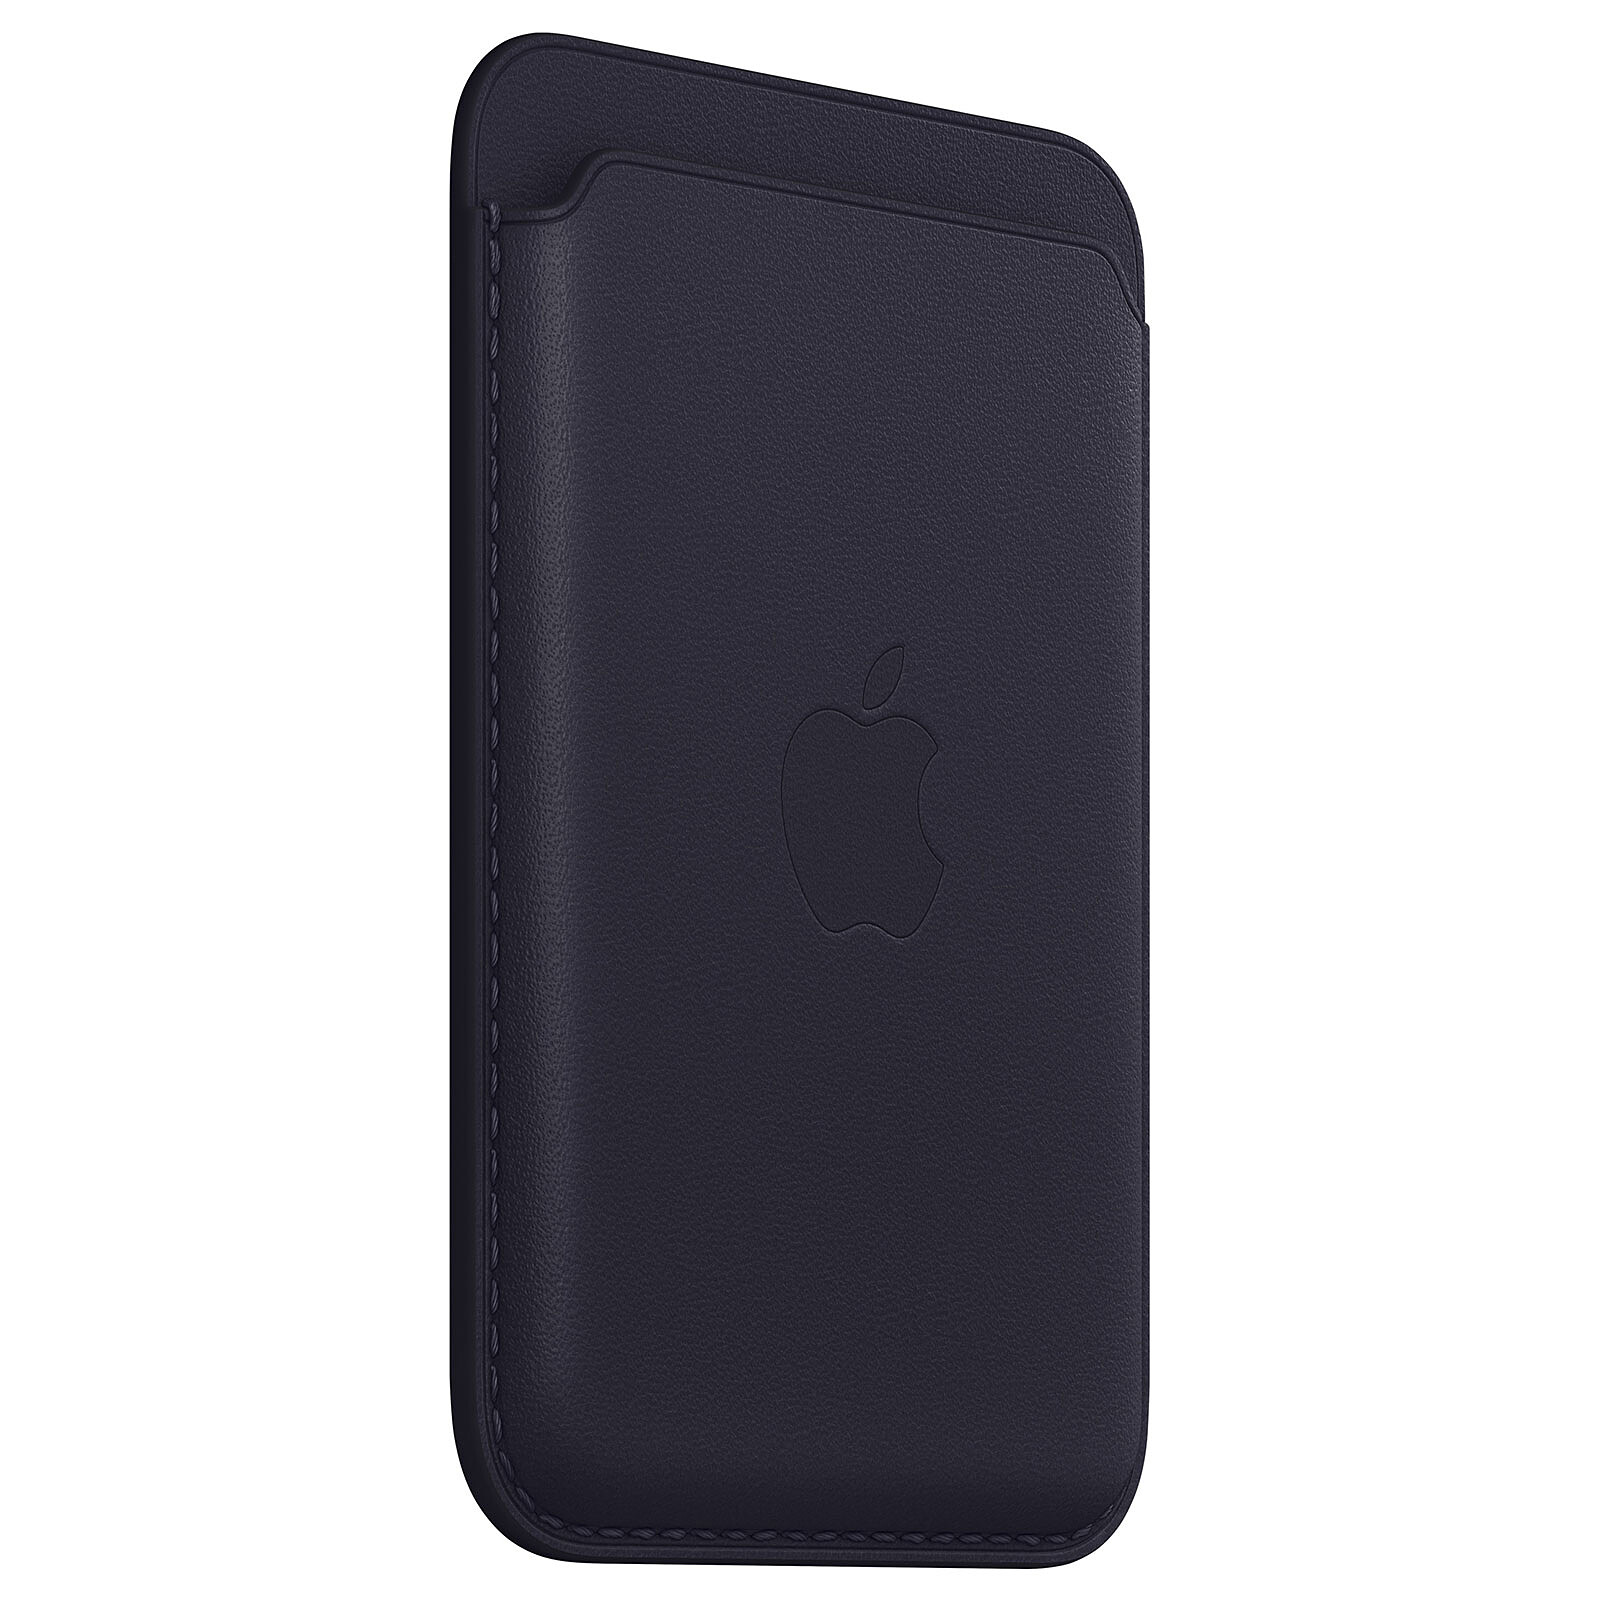 Apple iPhone Leather Wallet with MagSafe ink purple - MagSafe Wallet